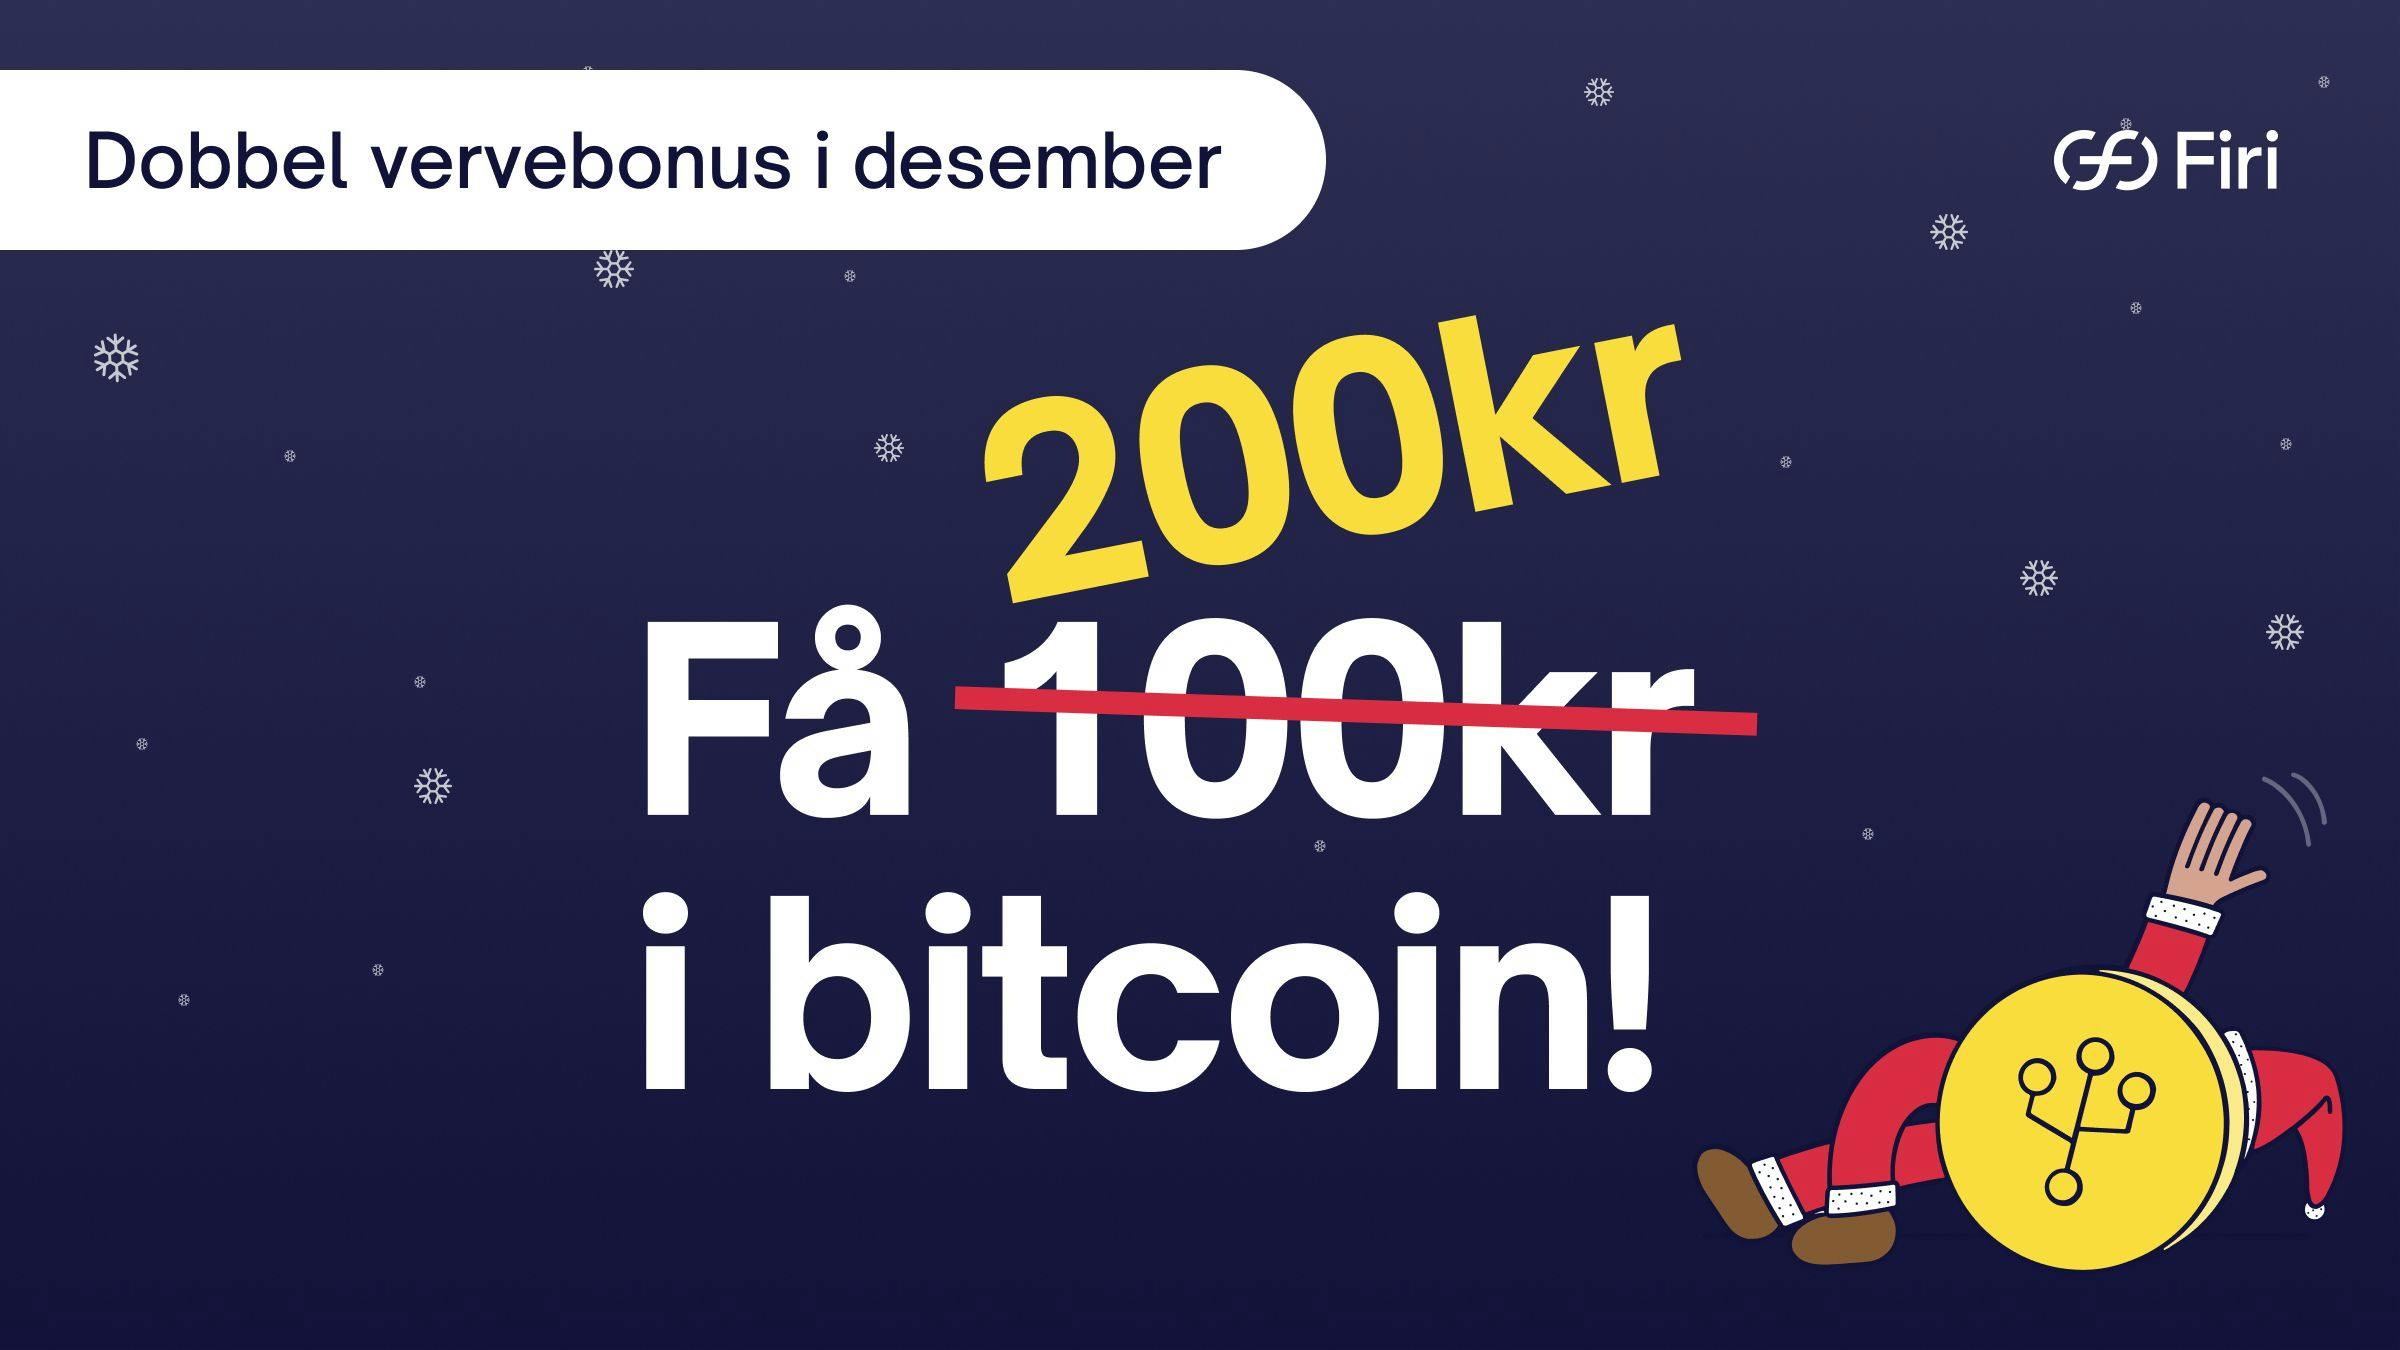 Greetings from Firi’s very own Santa Claus: Get 200 kroner in bitcoin!